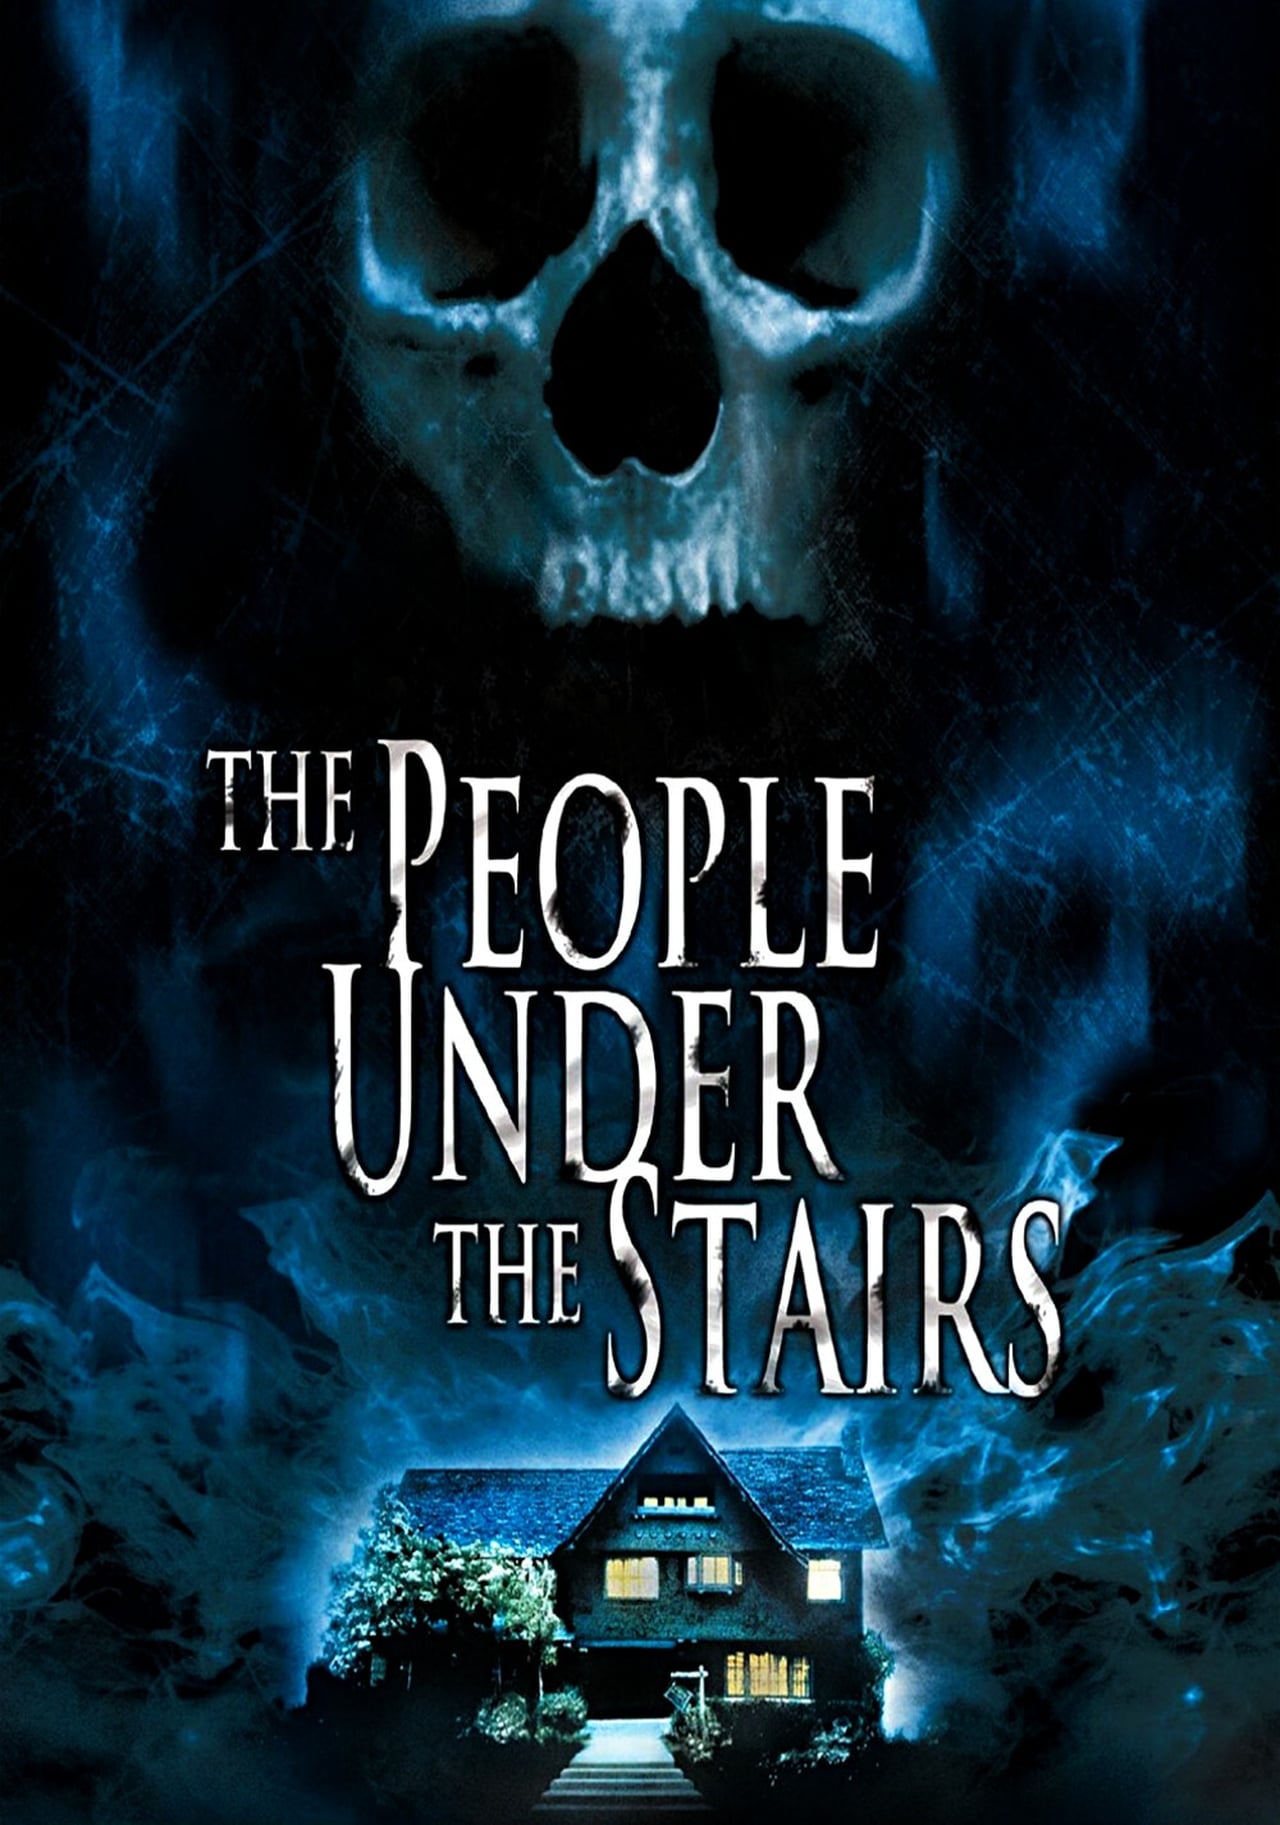 The People Under the Stairs wiki, synopsis, reviews, watch and download